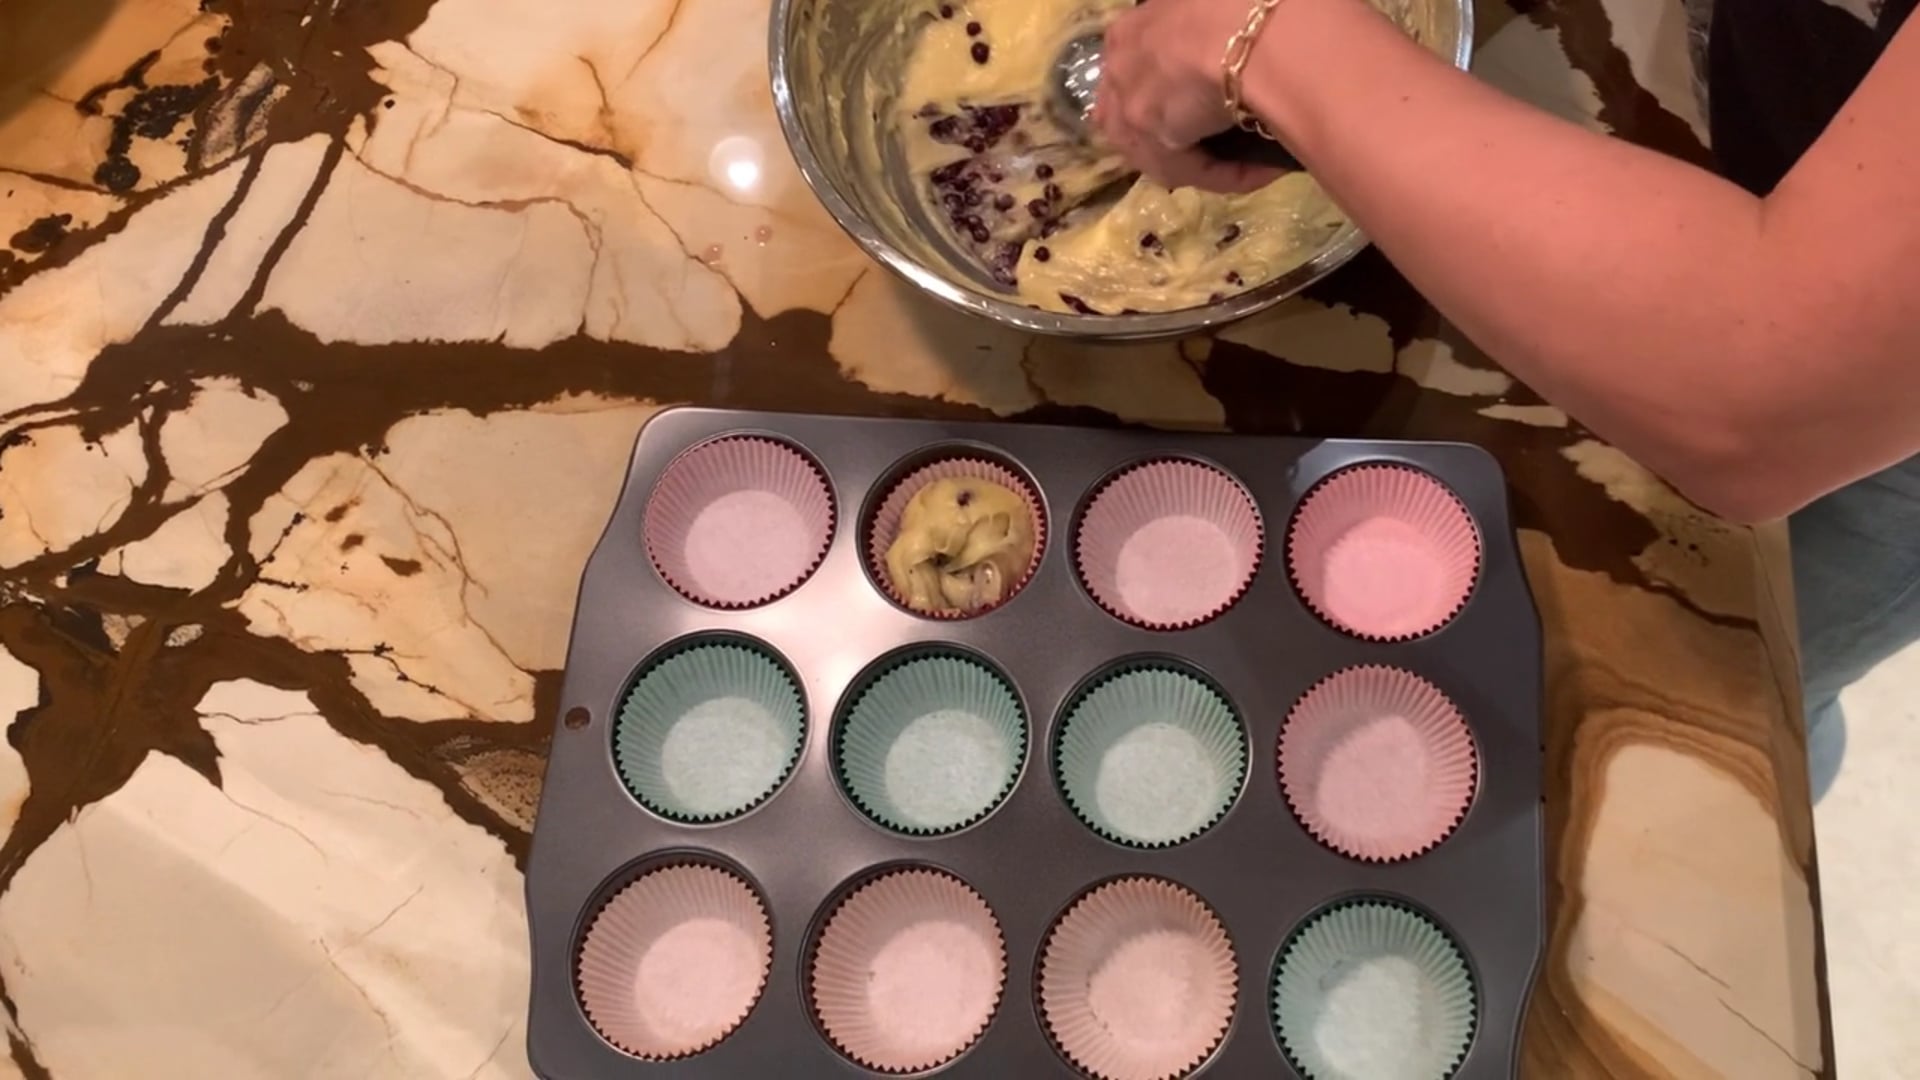 How to make blueberry muffins